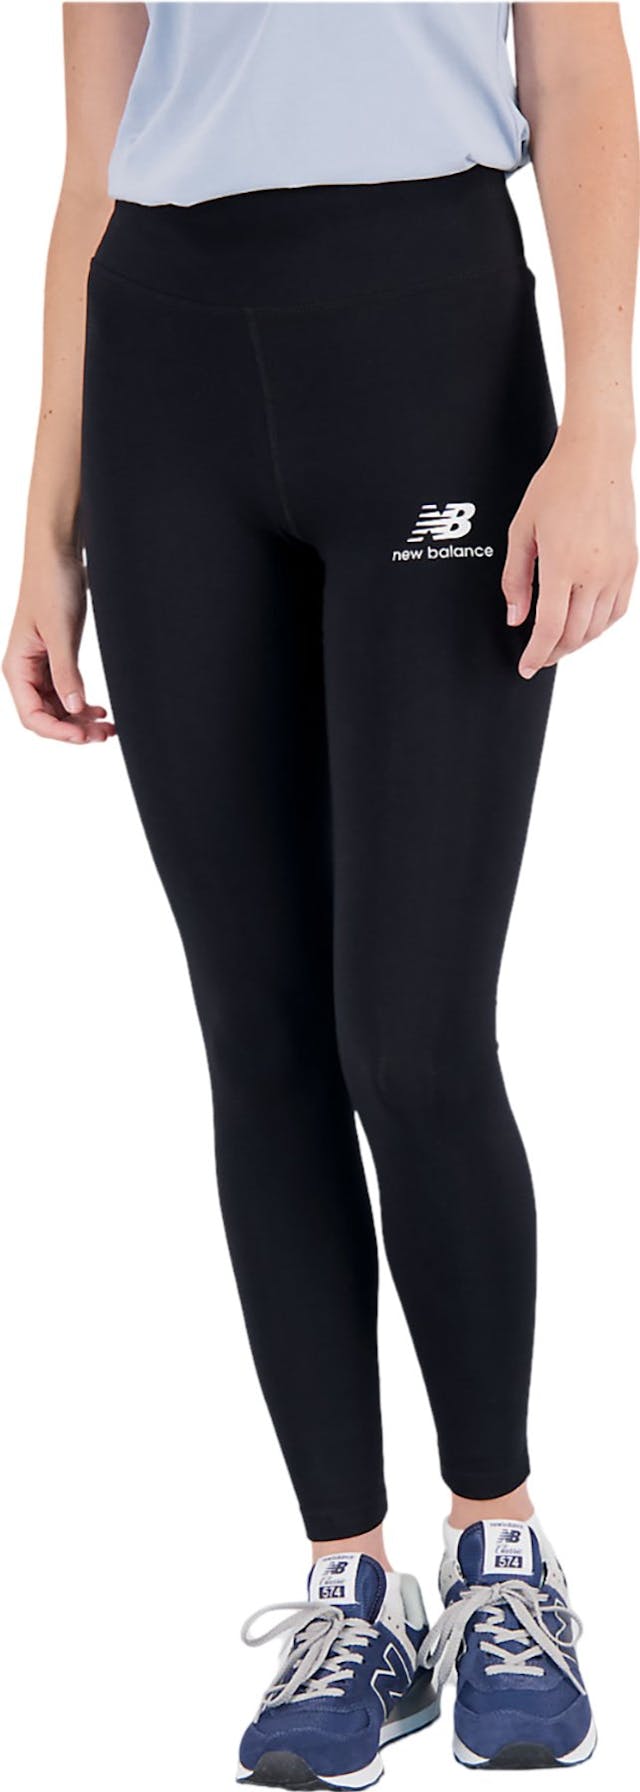 Product image for Essentials Stacked Logo Cotton Legging - Women's